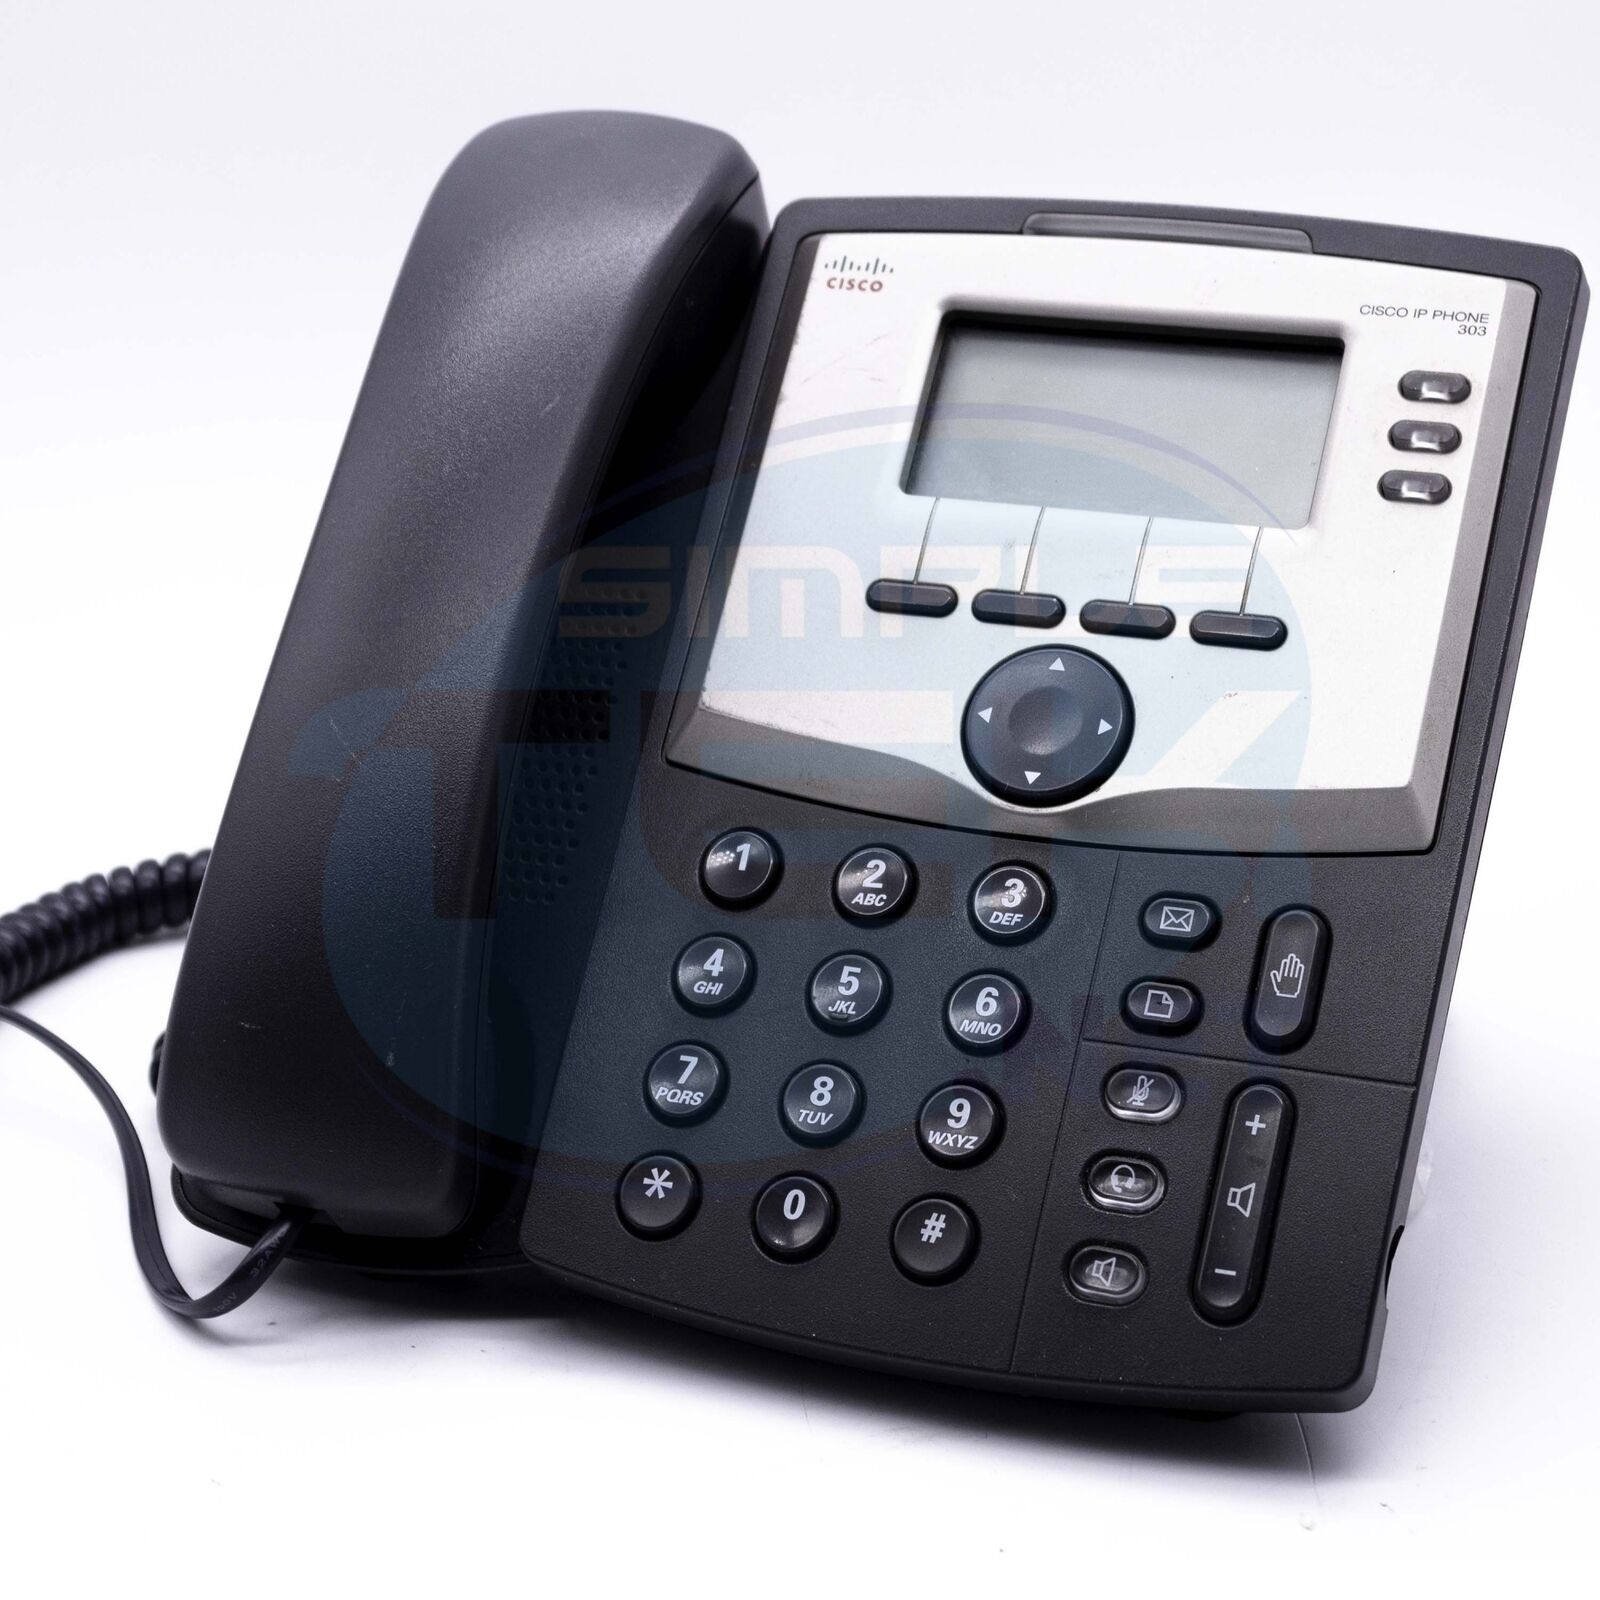 Cisco Spa 10.7oz2 Phone IP Voip A 3 Lines With Display And Port P Reconditioned